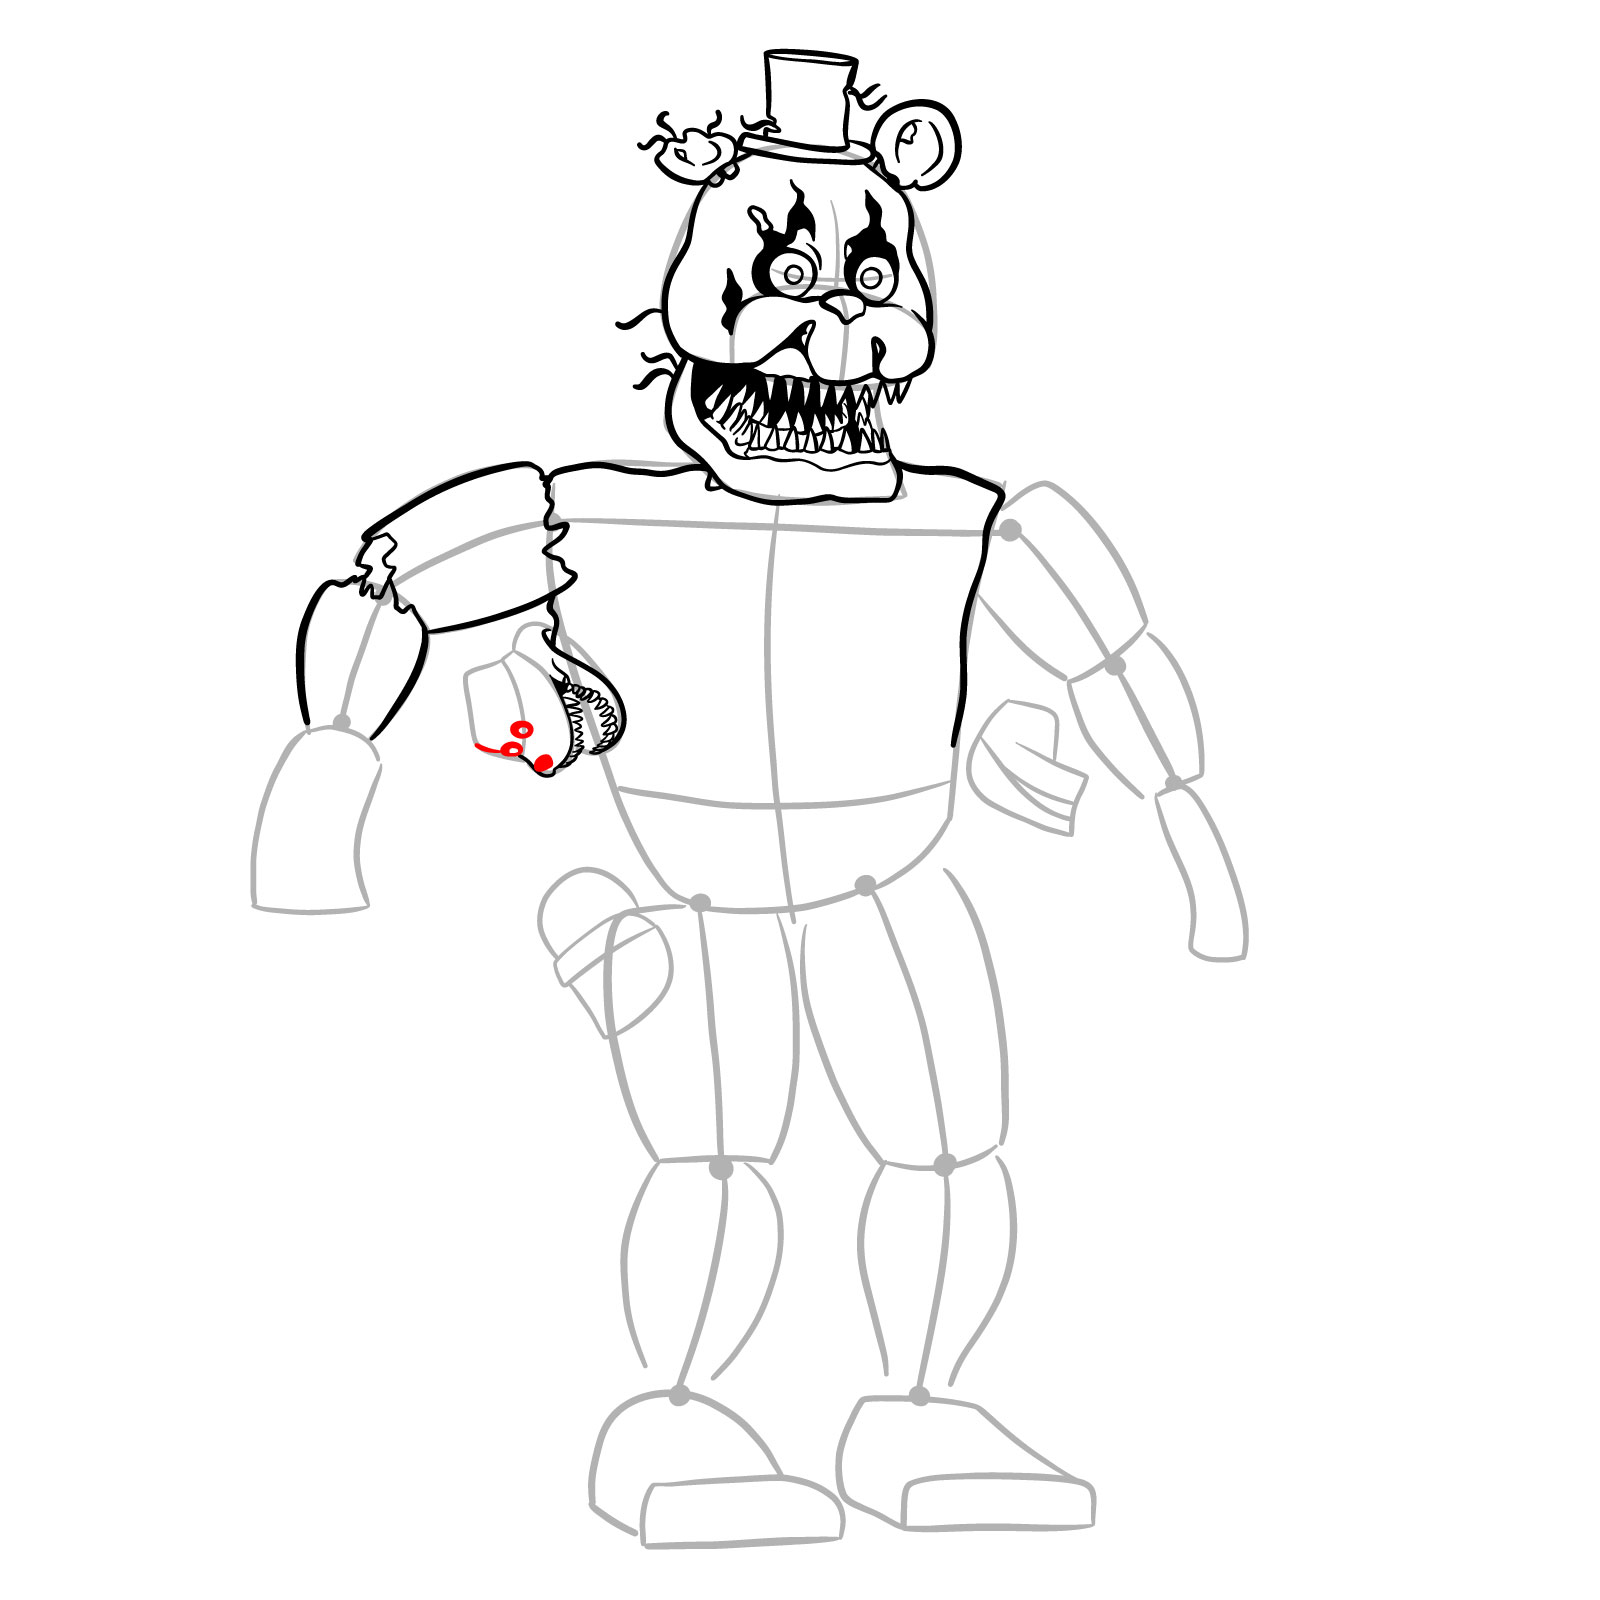 How to draw Nightmare Freddy Sketchok easy drawing guides